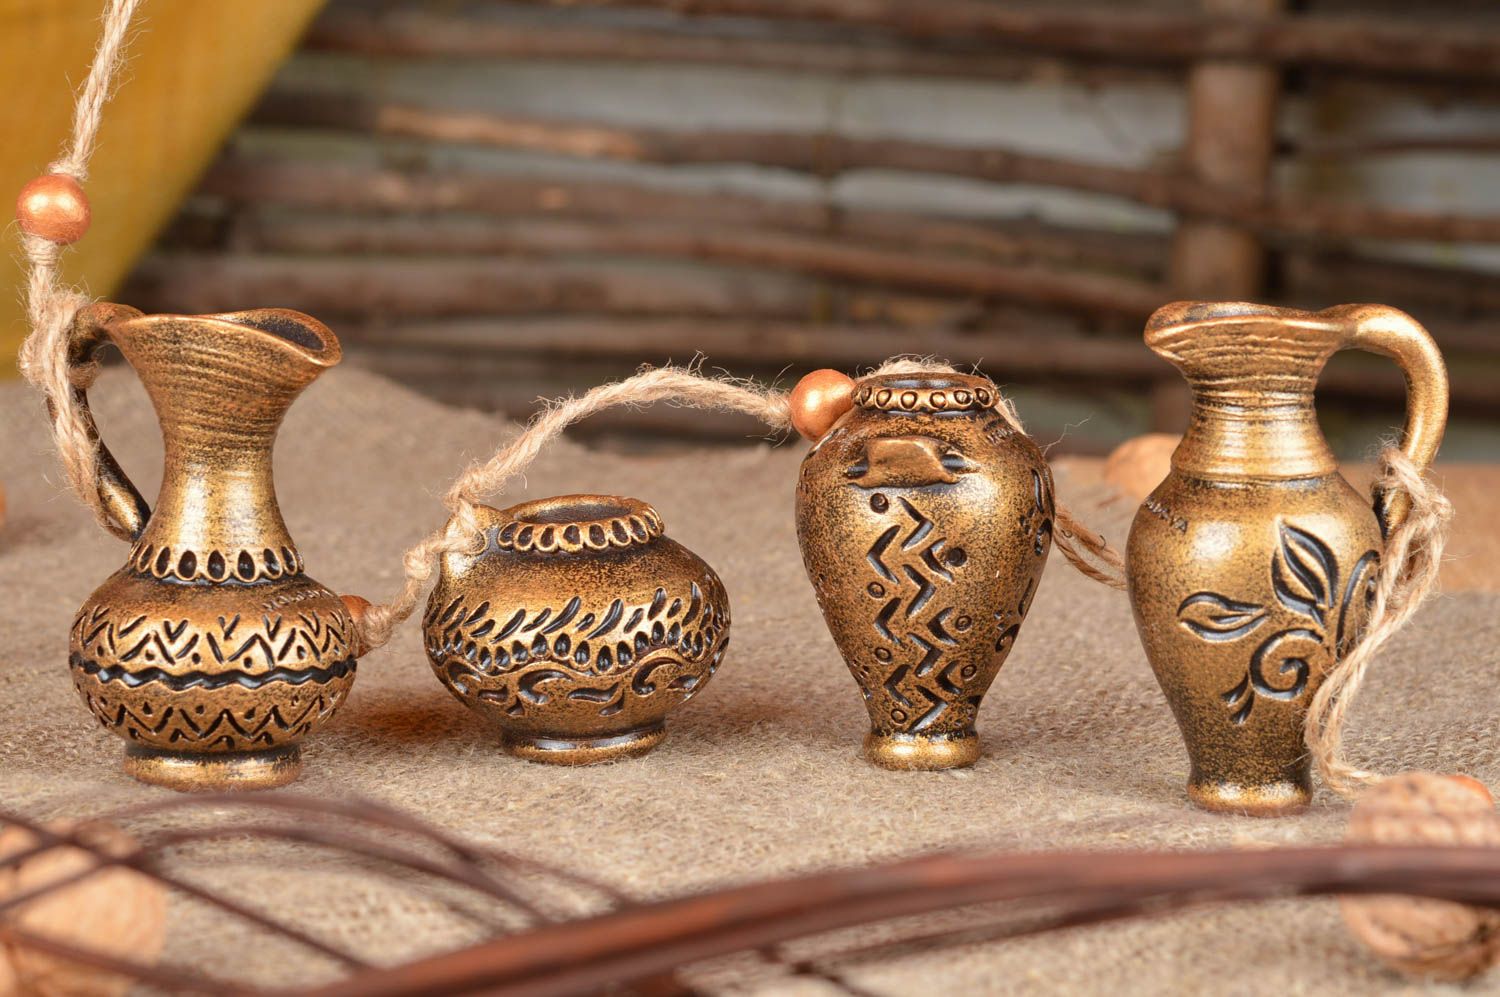 Unique pendant in form of handmade decorative pots made of clay 4 pieces photo 1